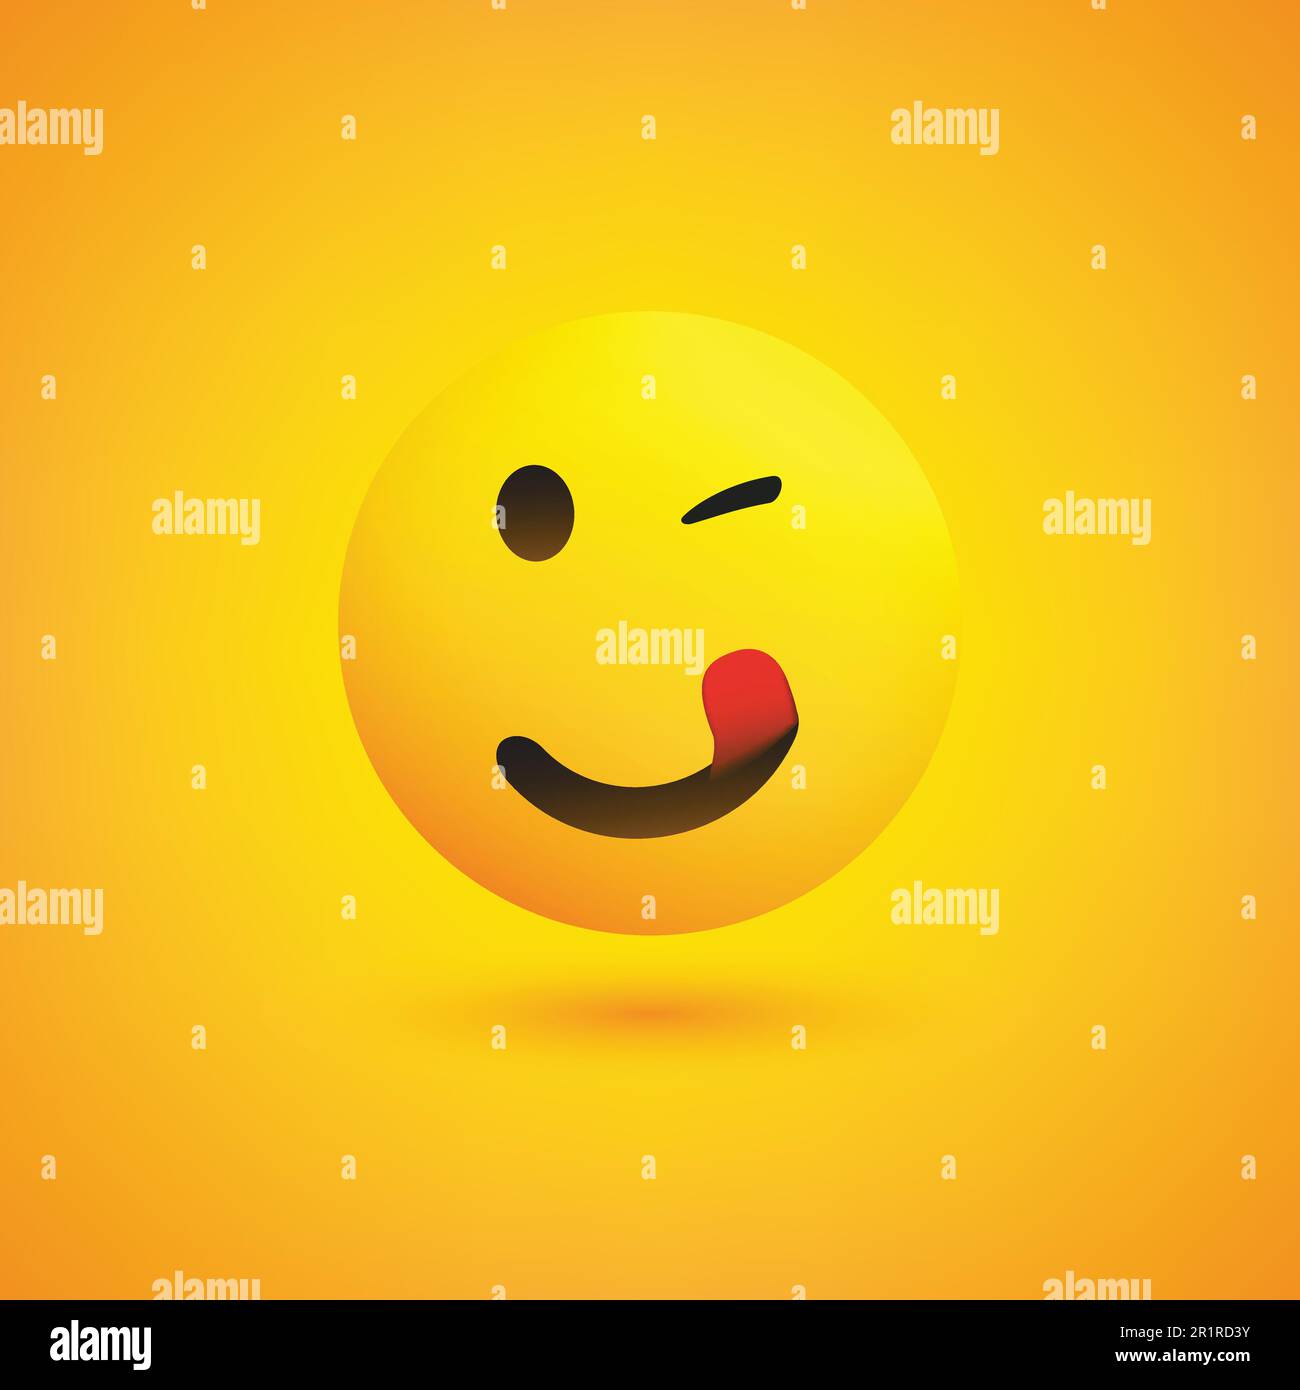 Smiling, Winking and Mouth Licking Emoji with Stuck Out Tongue - Simple Happy Emoticon on Yellow Background - Vector Design Stock Vector